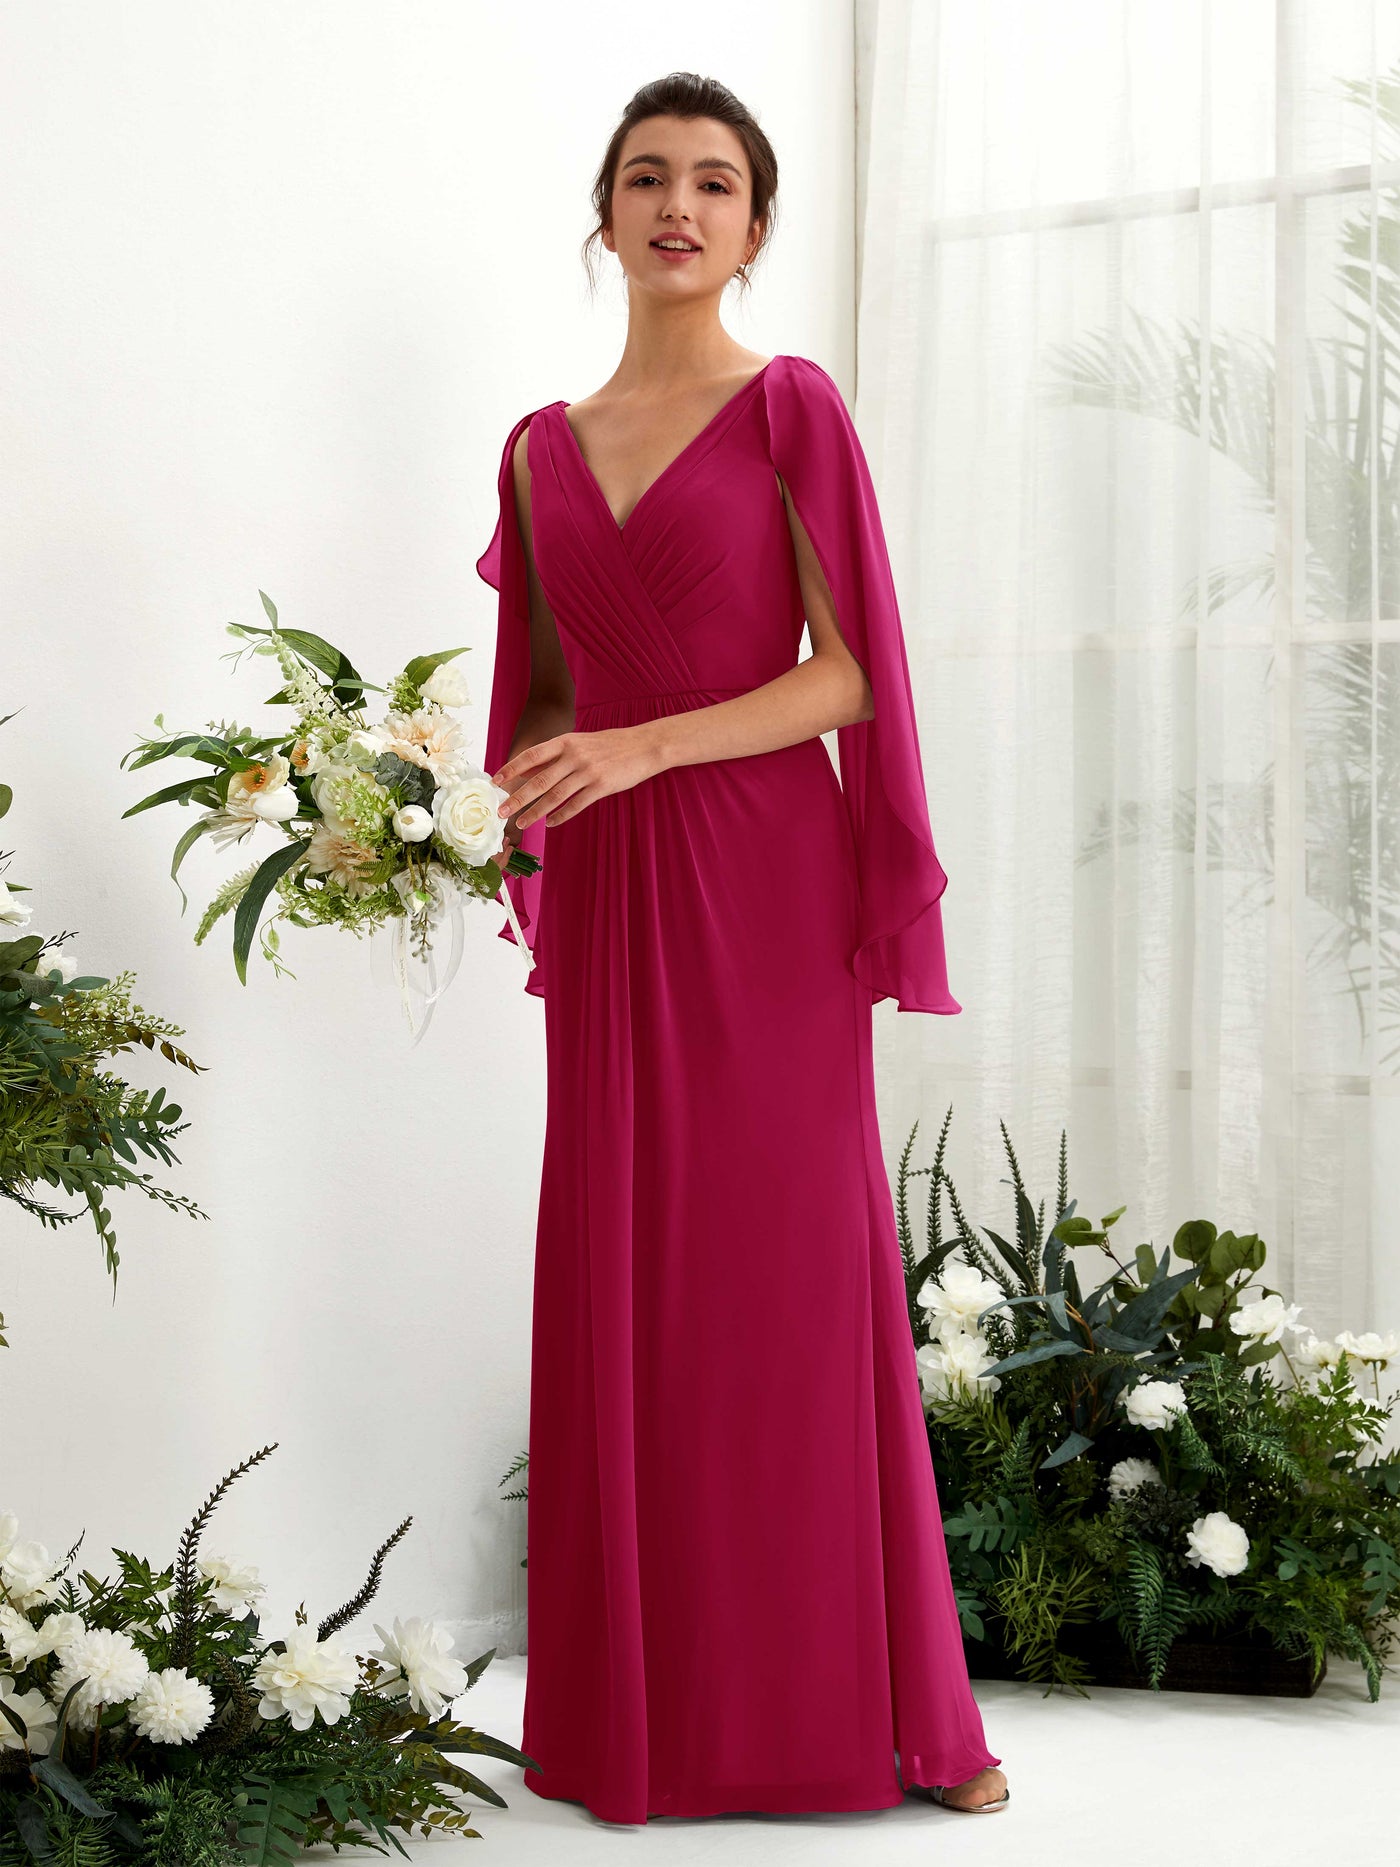 Jester Red Bridesmaid Dresses Bridesmaid Dress A-line Chiffon Straps Full Length Long Sleeves Wedding Party Dress (80220141)#color_jester-red